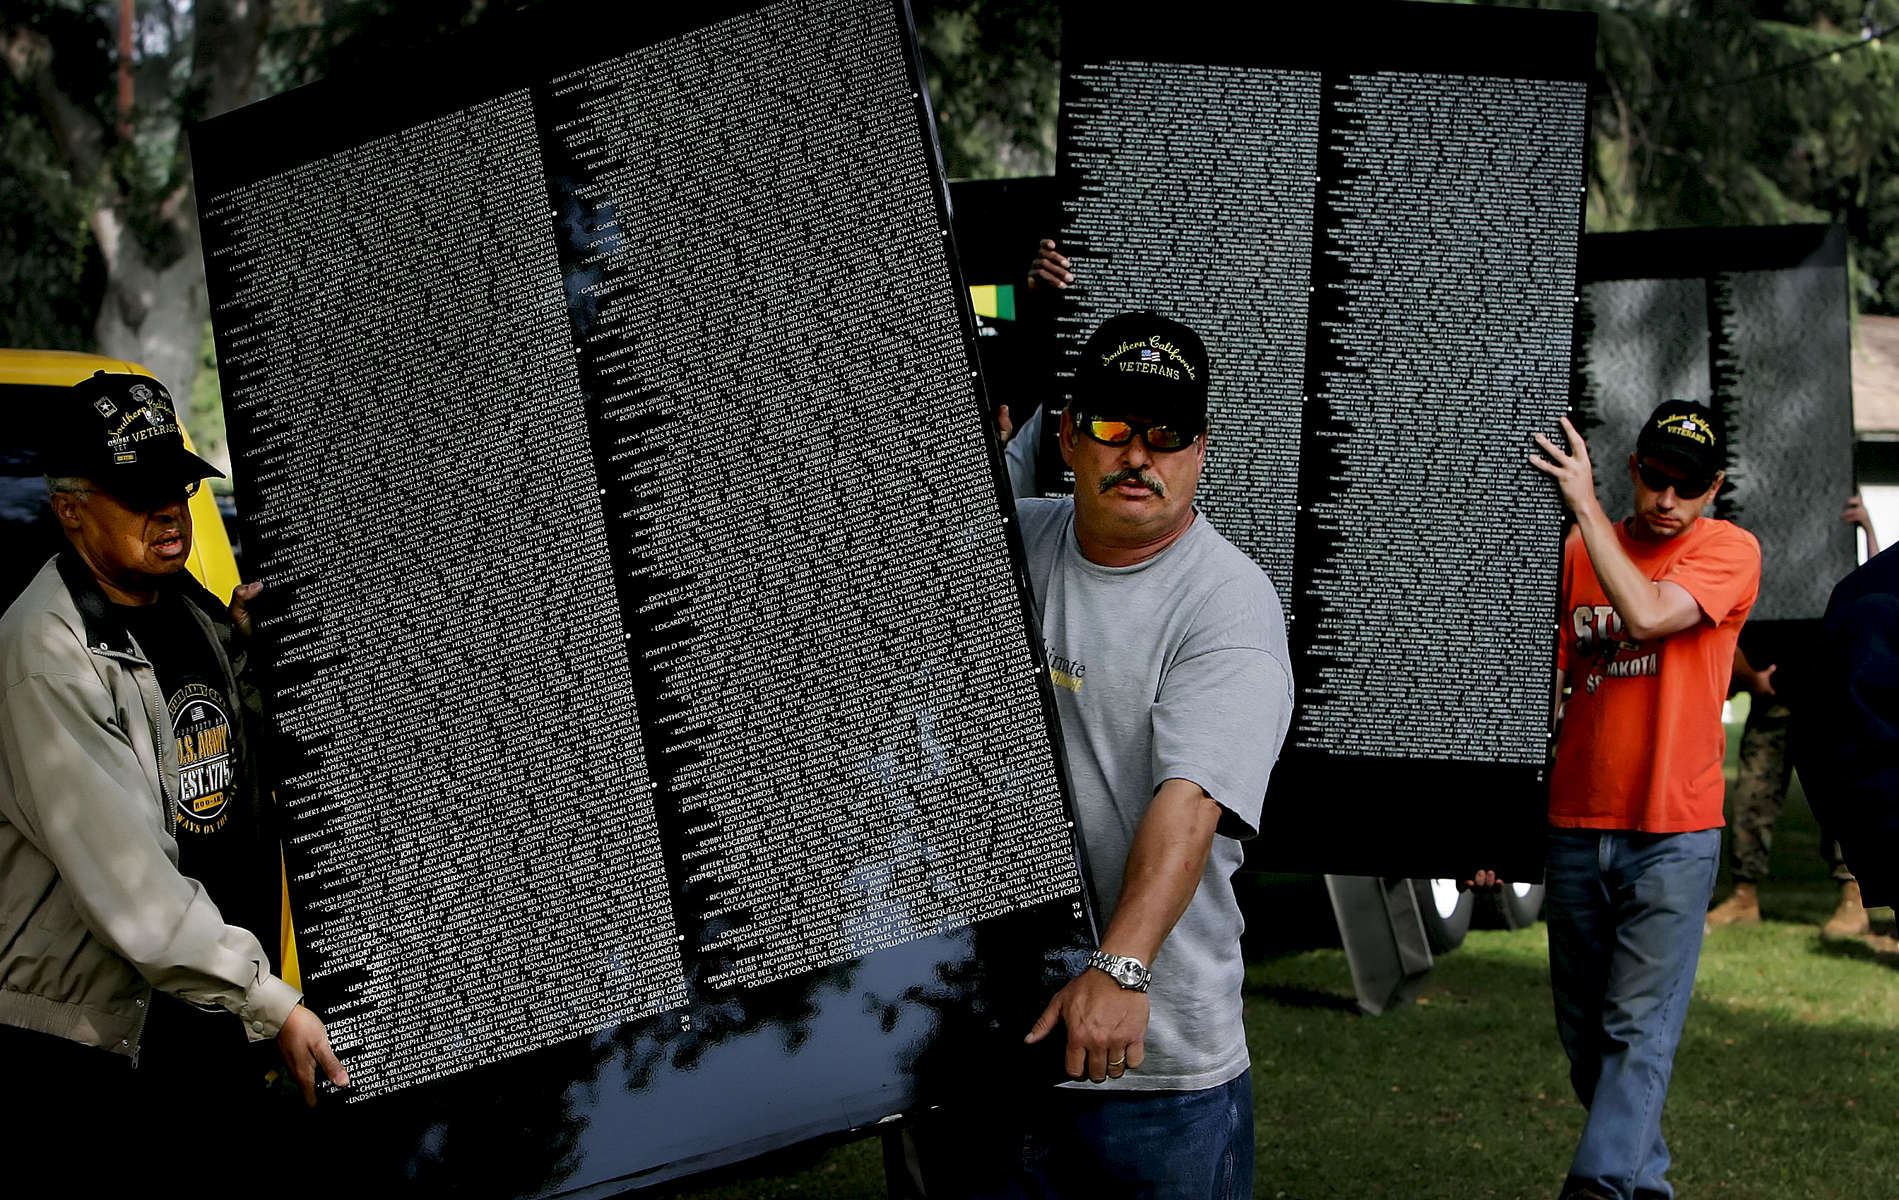 The Vietnam Veterans Memorial Moving Wall is a half-size replica of the memorial located in Washington, D.C., and travels the country honoring the dead and missing Americansfrom the Vietnam War (1959-1975). Volunteers carry several panels to put in place duringconstruction of The Moving Wall in Redlands, Calif. (The Press-Enterprise/ Mark Zaleski)